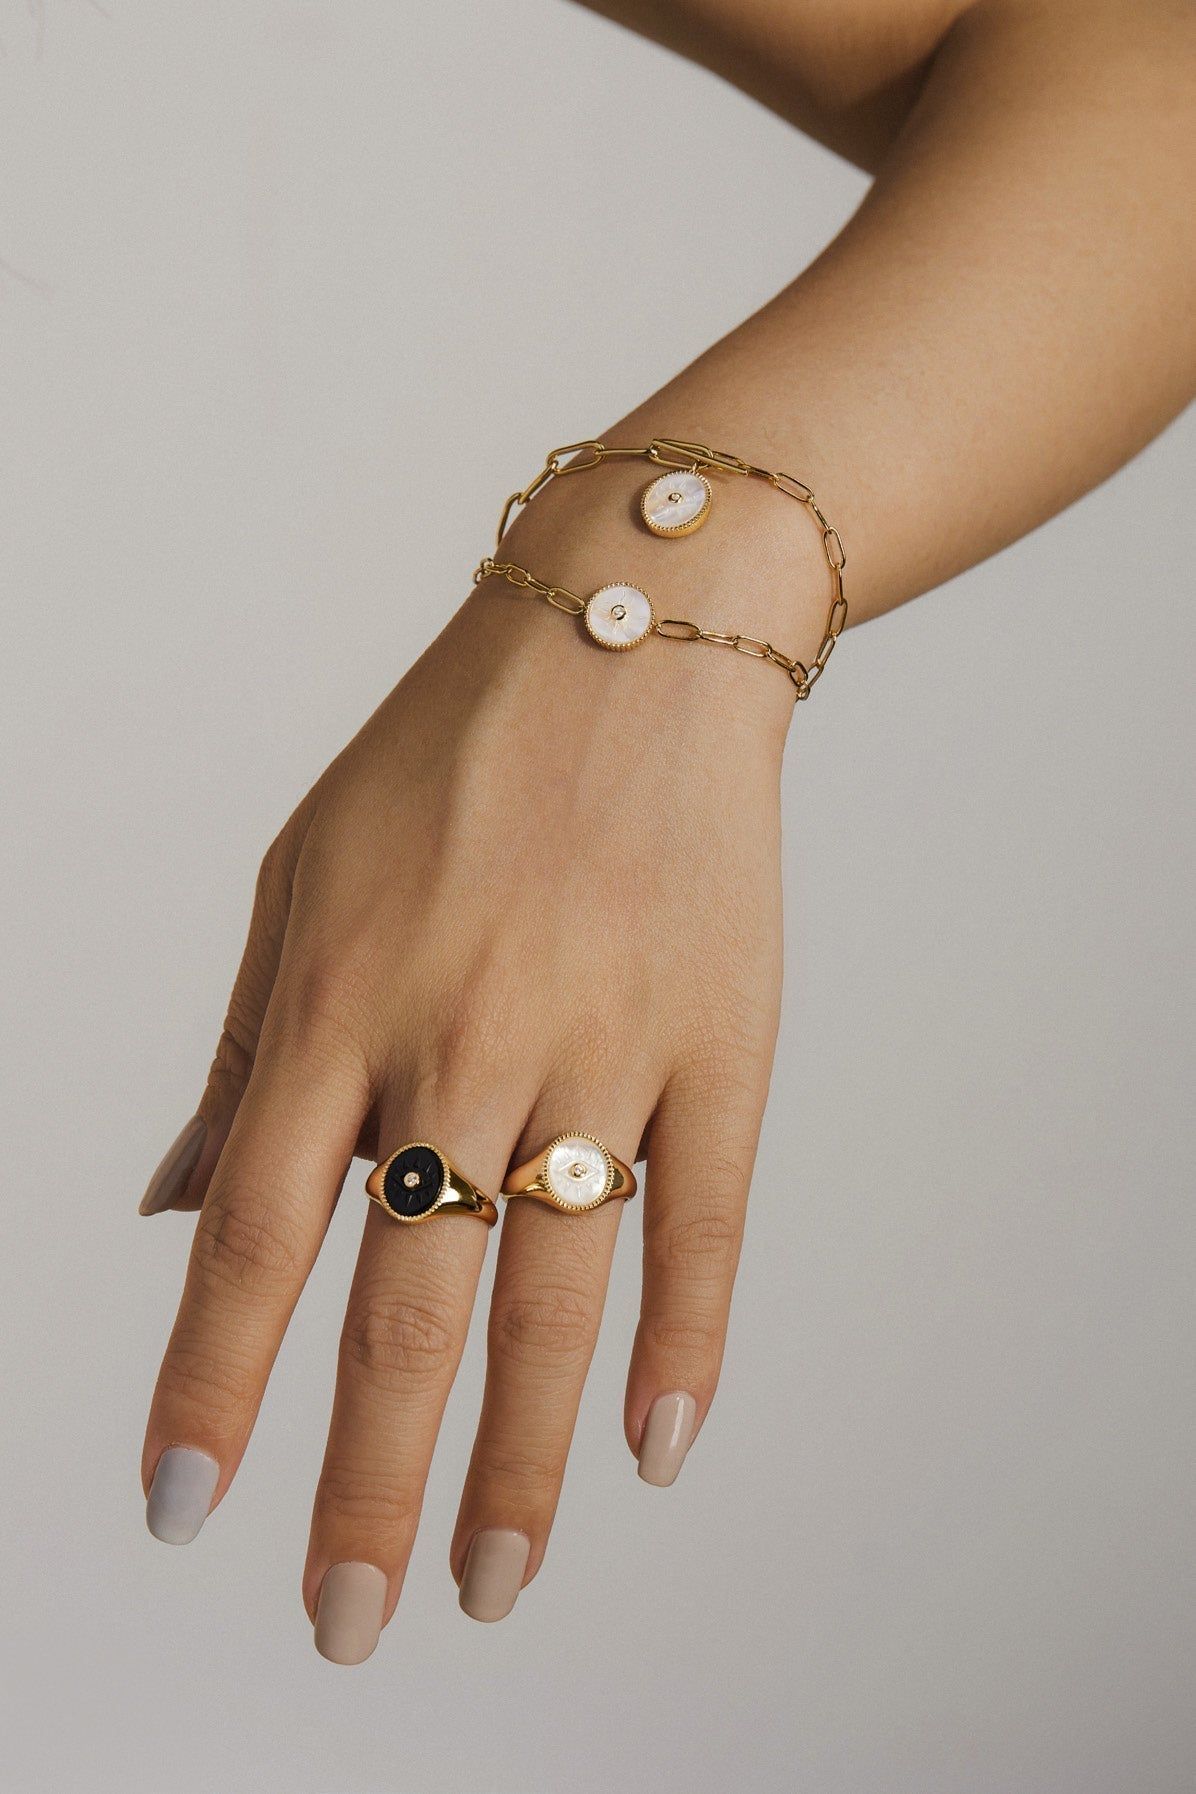 a woman's hand wearing a gold bracelet with pearls